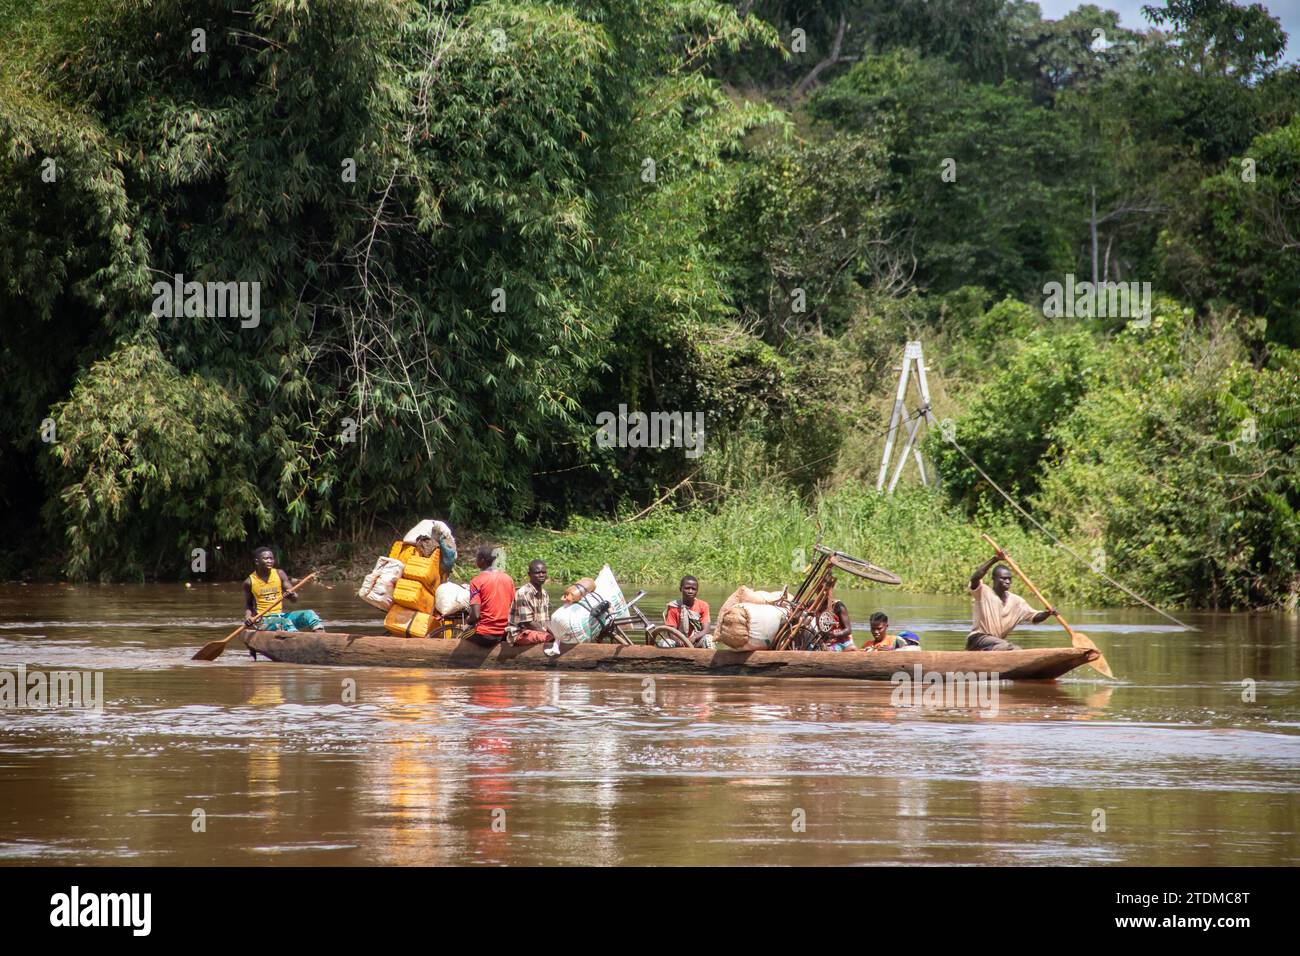 Transport of people across the Mbari river by locally made canoes and by ferry boat. Passengers colorfully dressed, transporting variety of goods Stock Photo